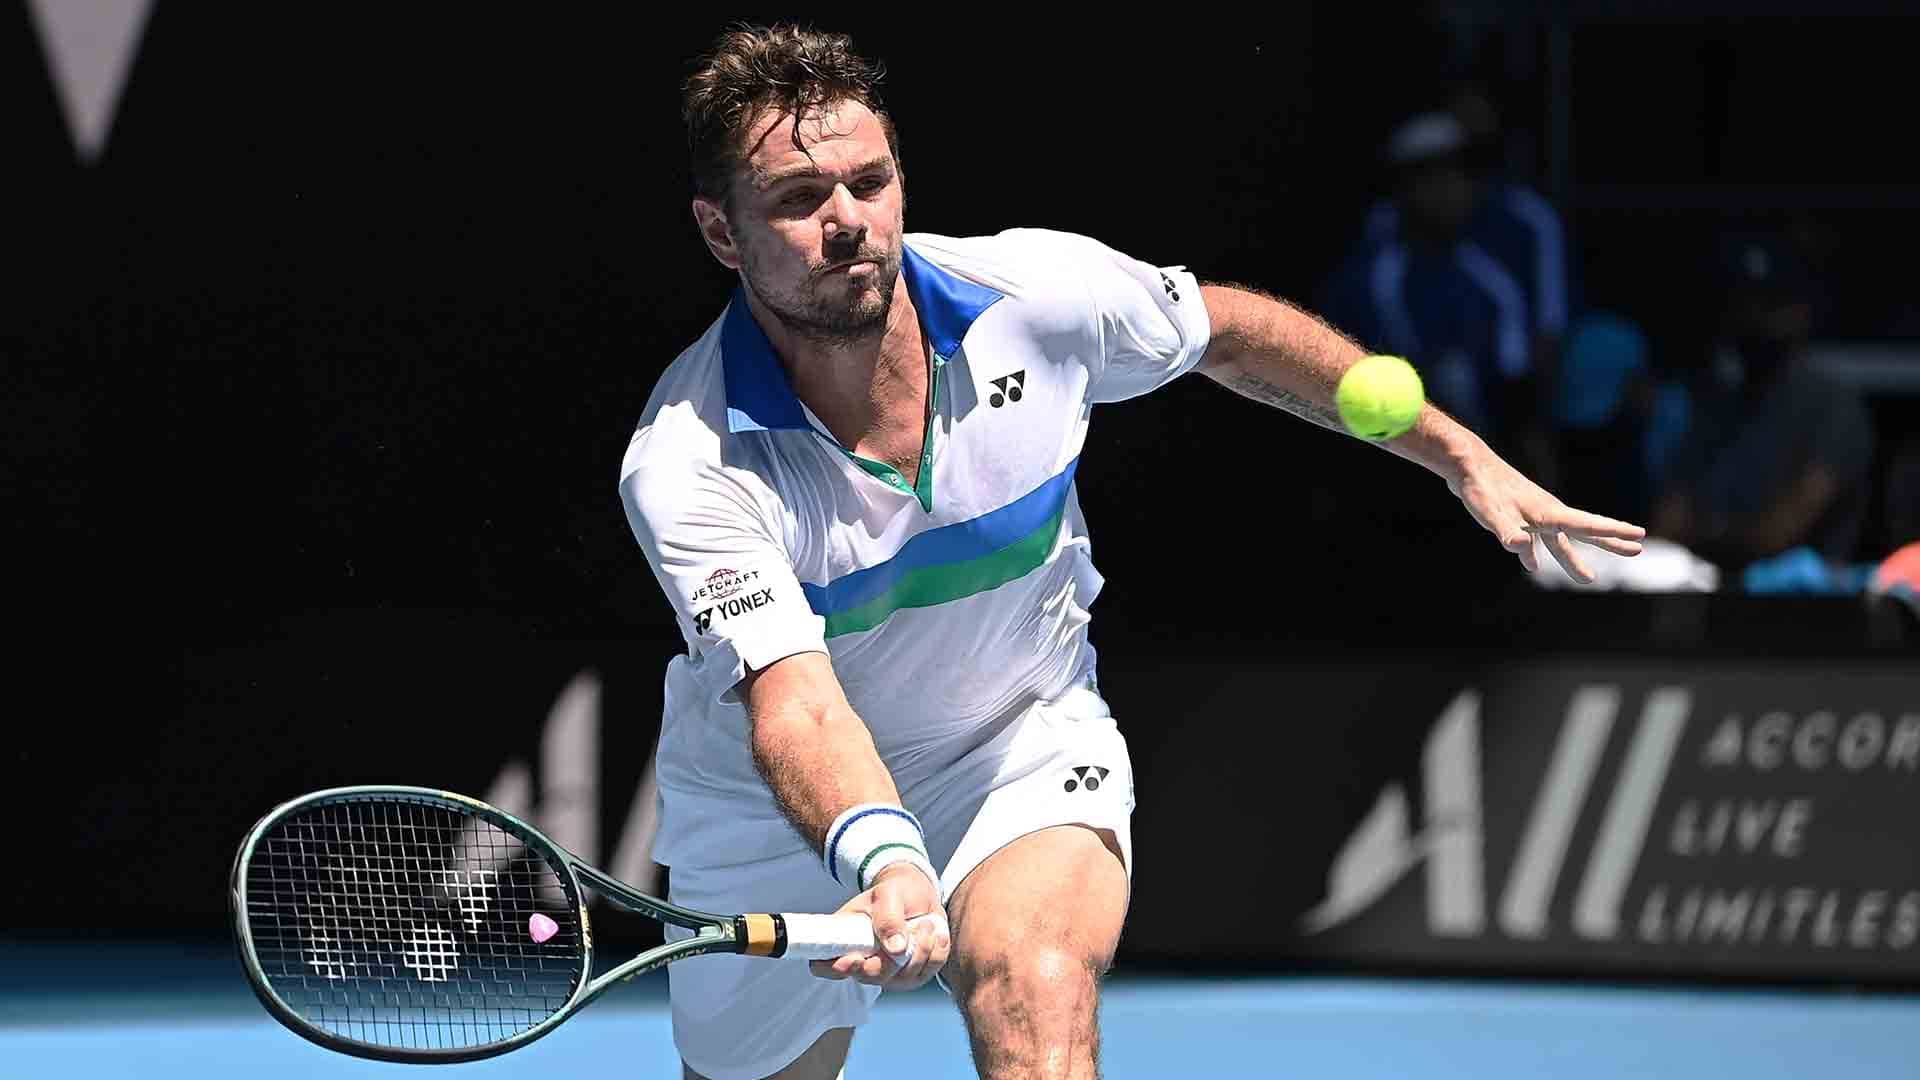 <a href='https://www.atptour.com/en/players/stan-wawrinka/w367/overview'>Stan Wawrinka</a> was unable to convert three match points in his five-set loss to <a href='https://www.atptour.com/en/players/marton-fucsovics/f724/overview'>Marton Fucsovics</a> at the <a href='https://www.atptour.com/en/tournaments/australian-open/580/overview'>Australian Open</a>.